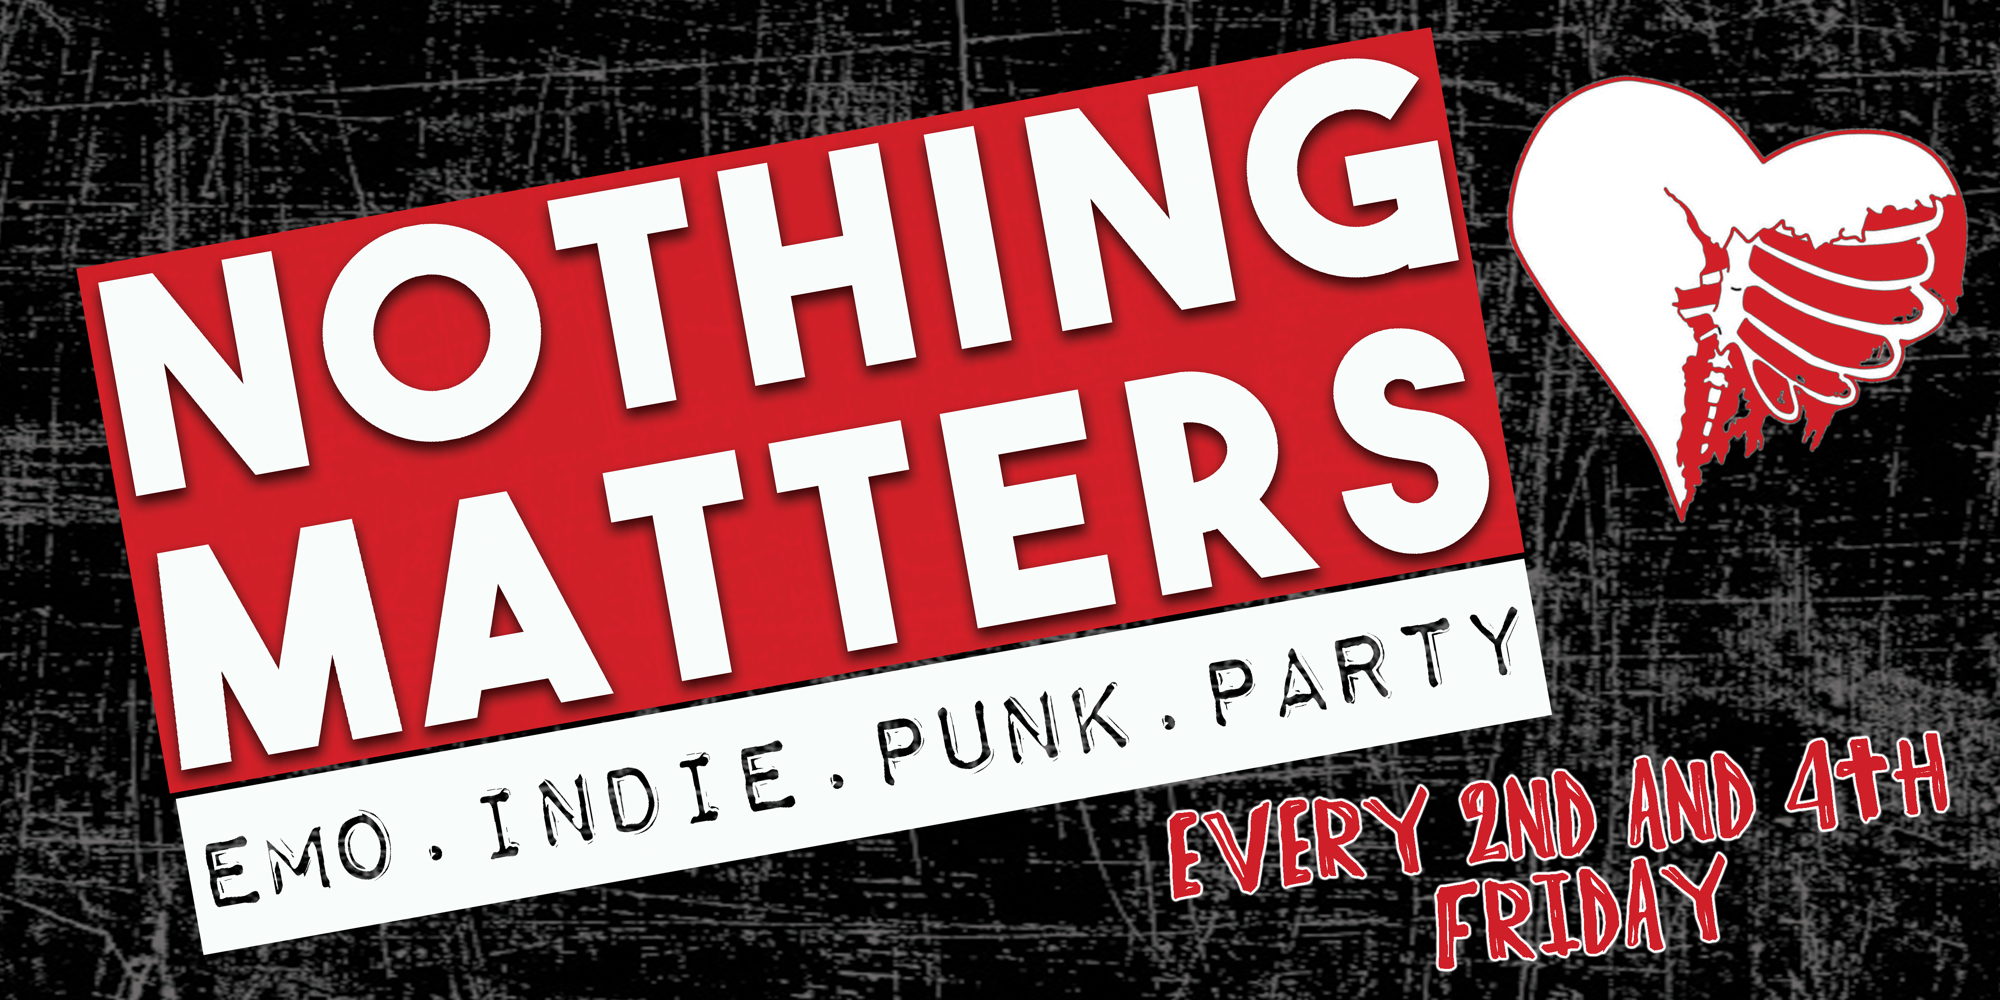 NOTHING MATTERS: EMO | INDIE | PUNK | PARTY